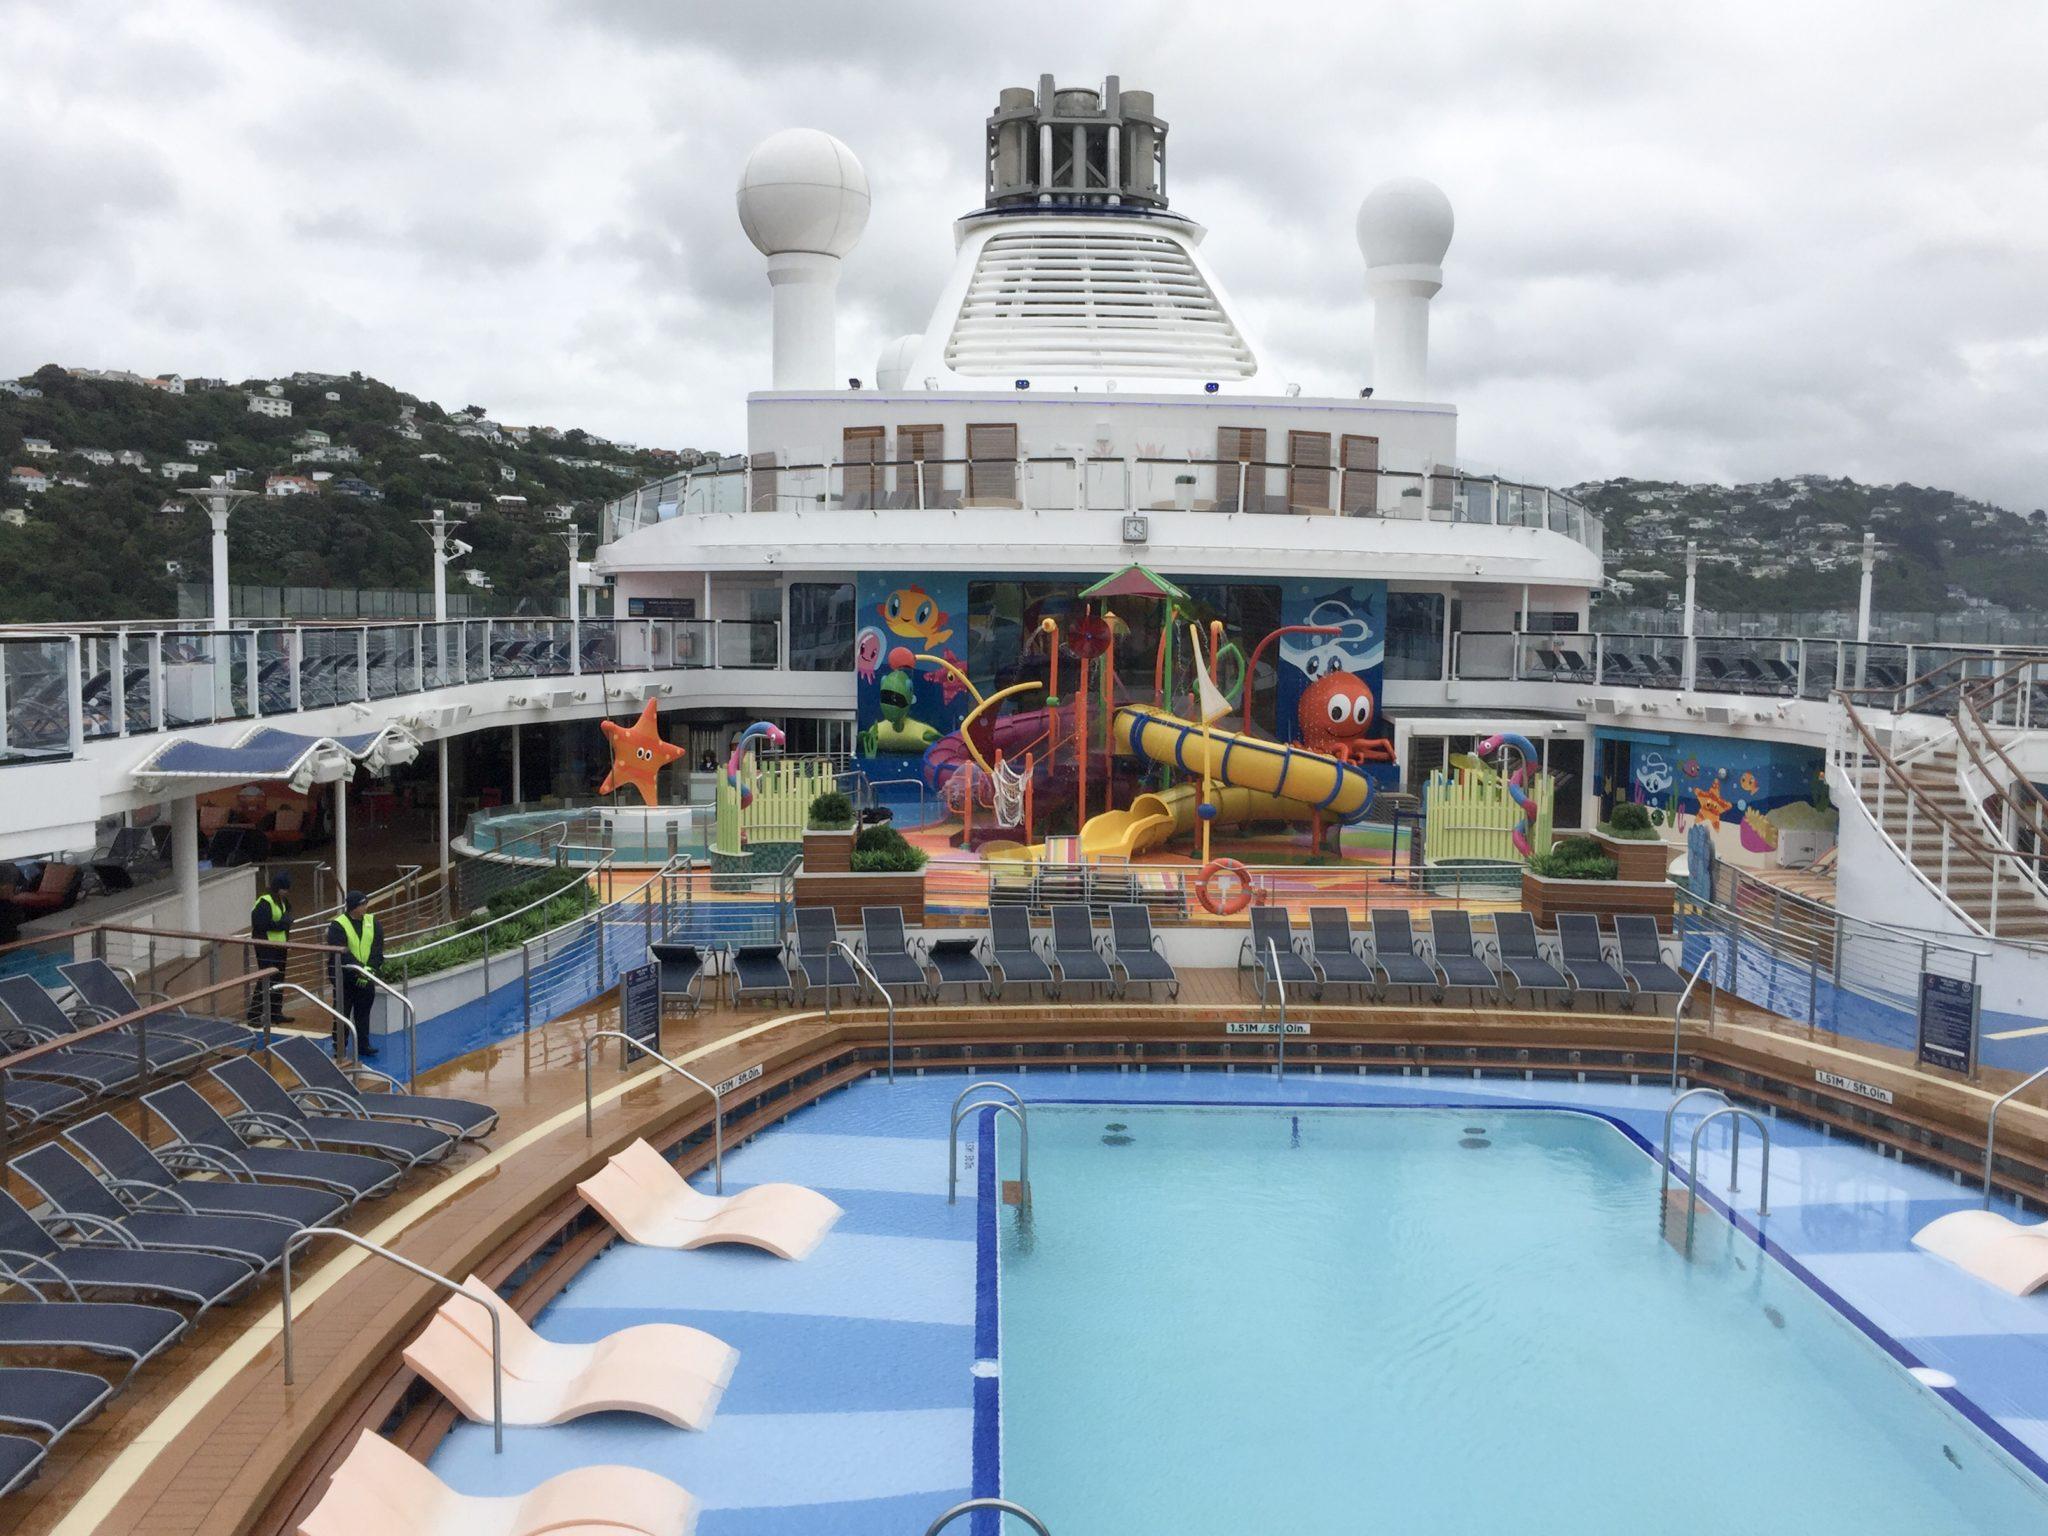 pool deck and waterslides on Ovation of the Seas